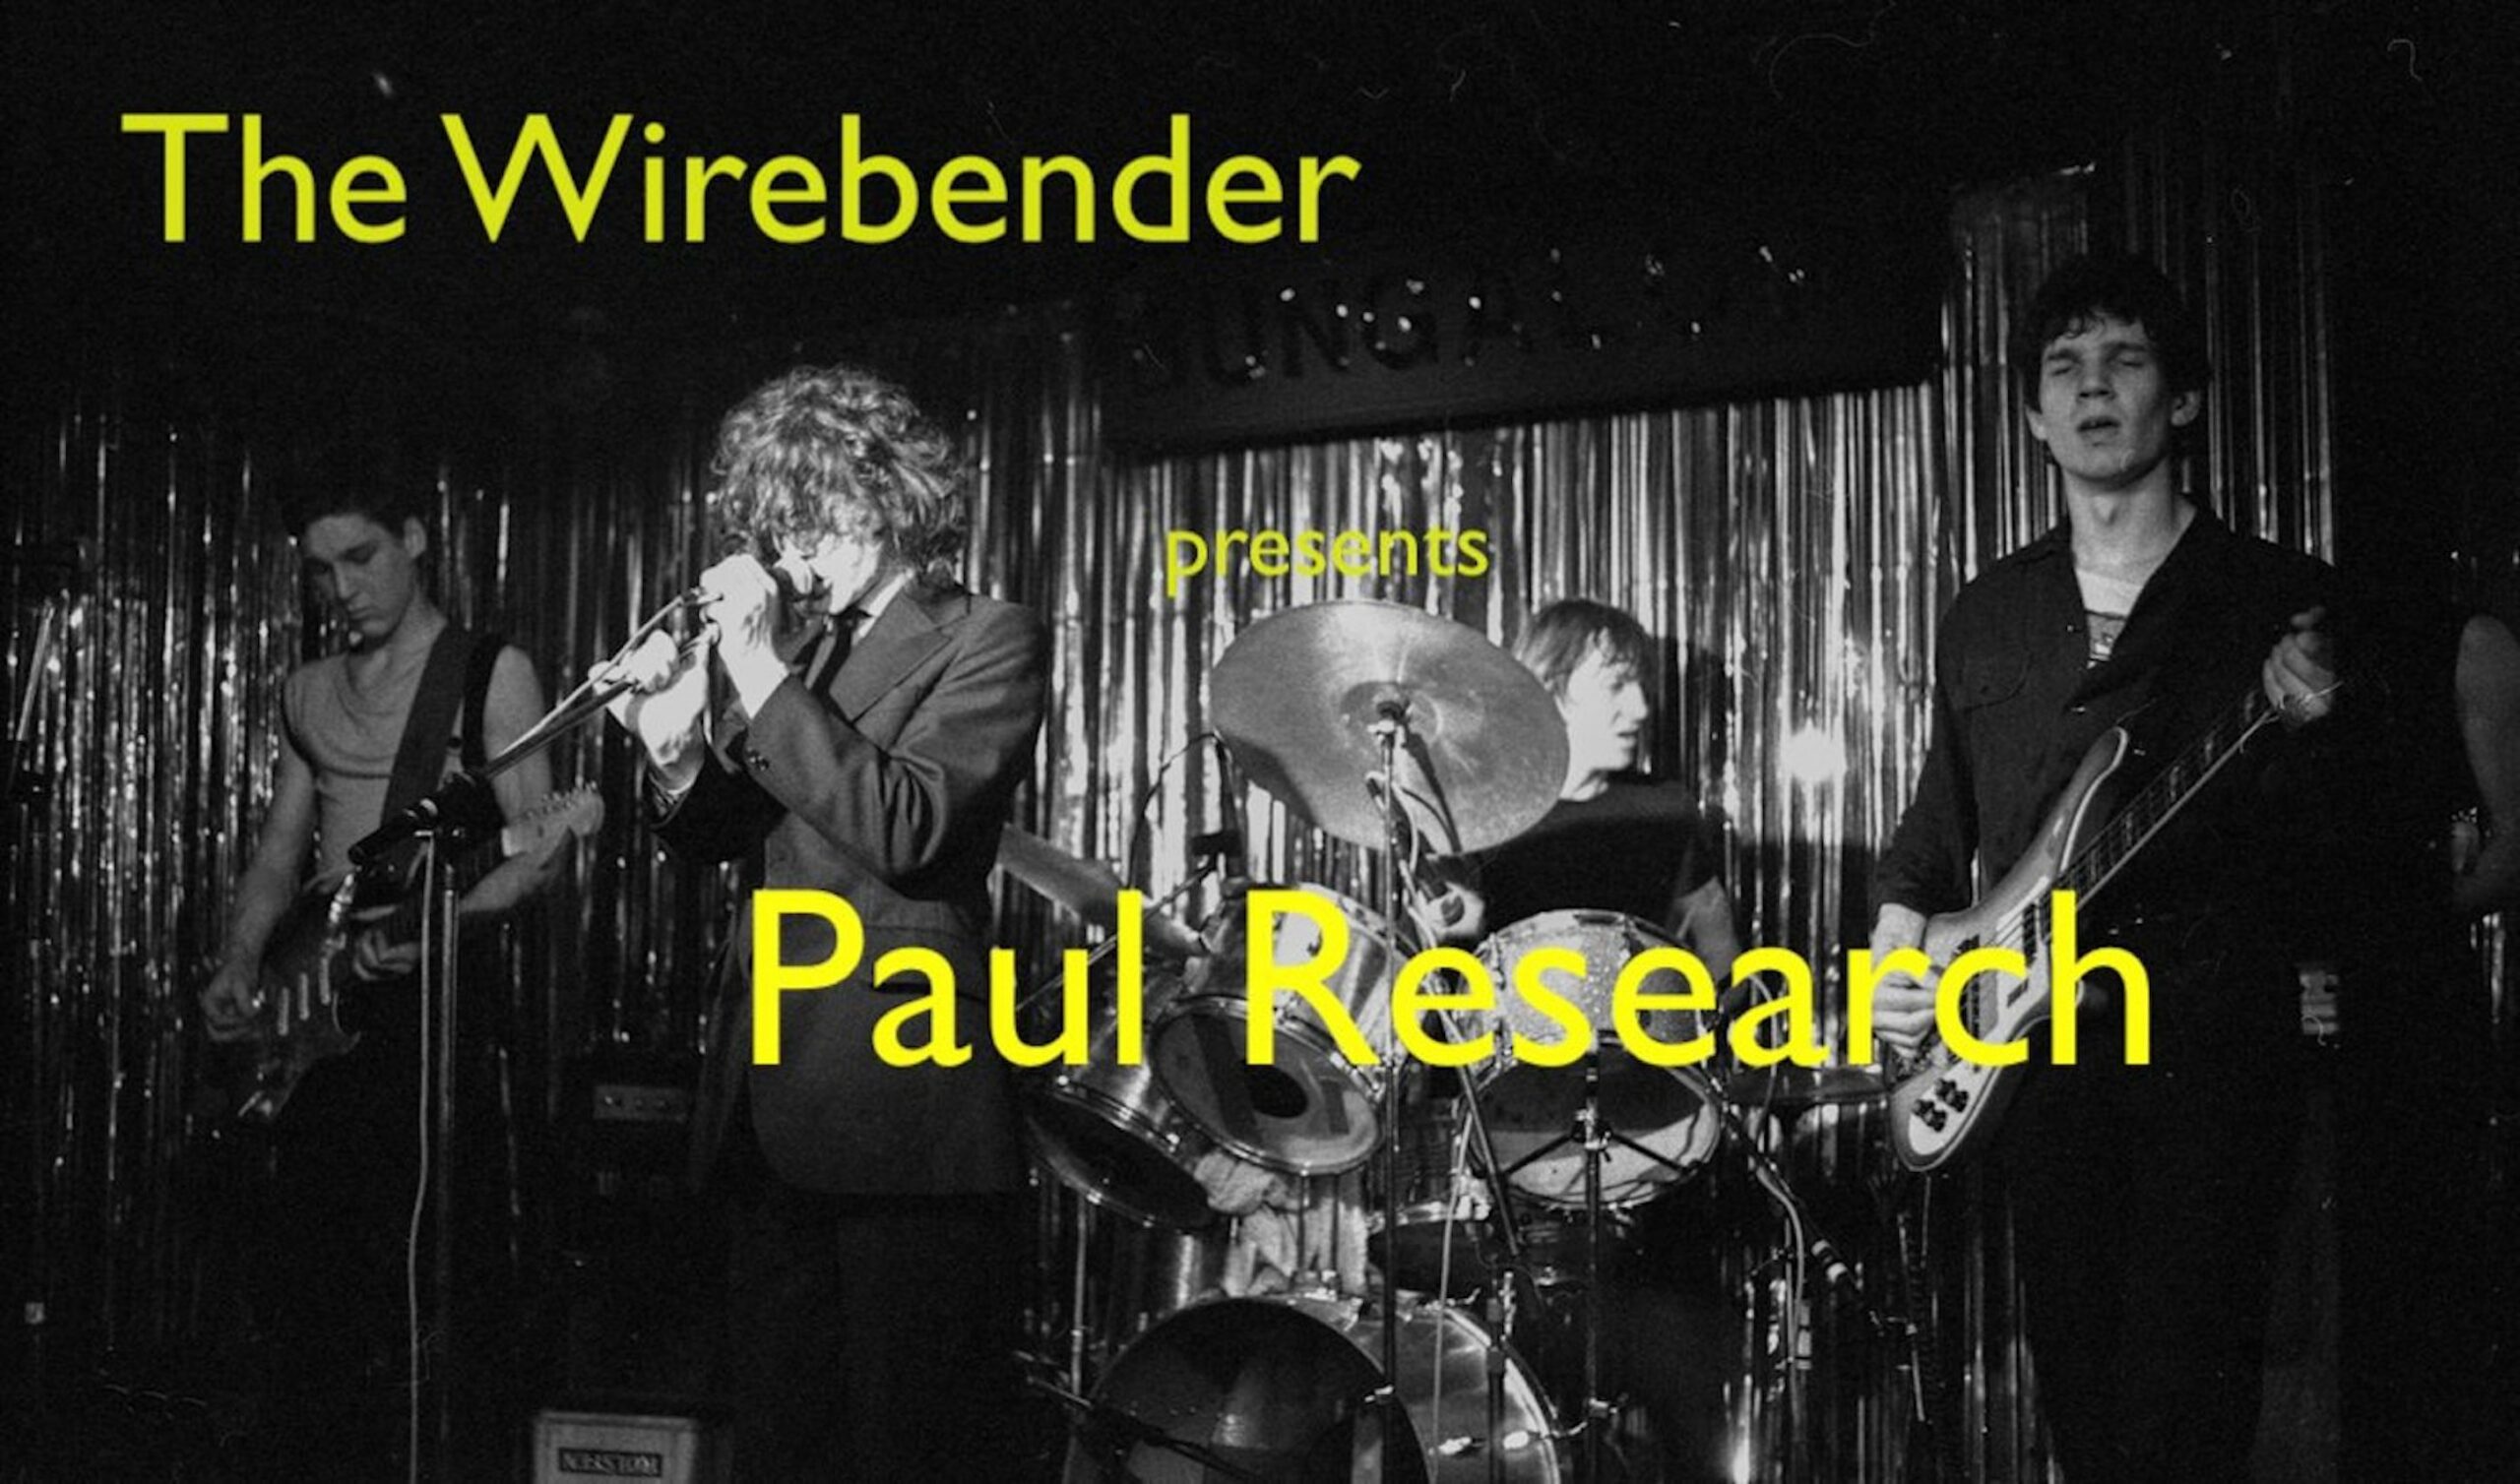 The Wirebender presents Paul Research